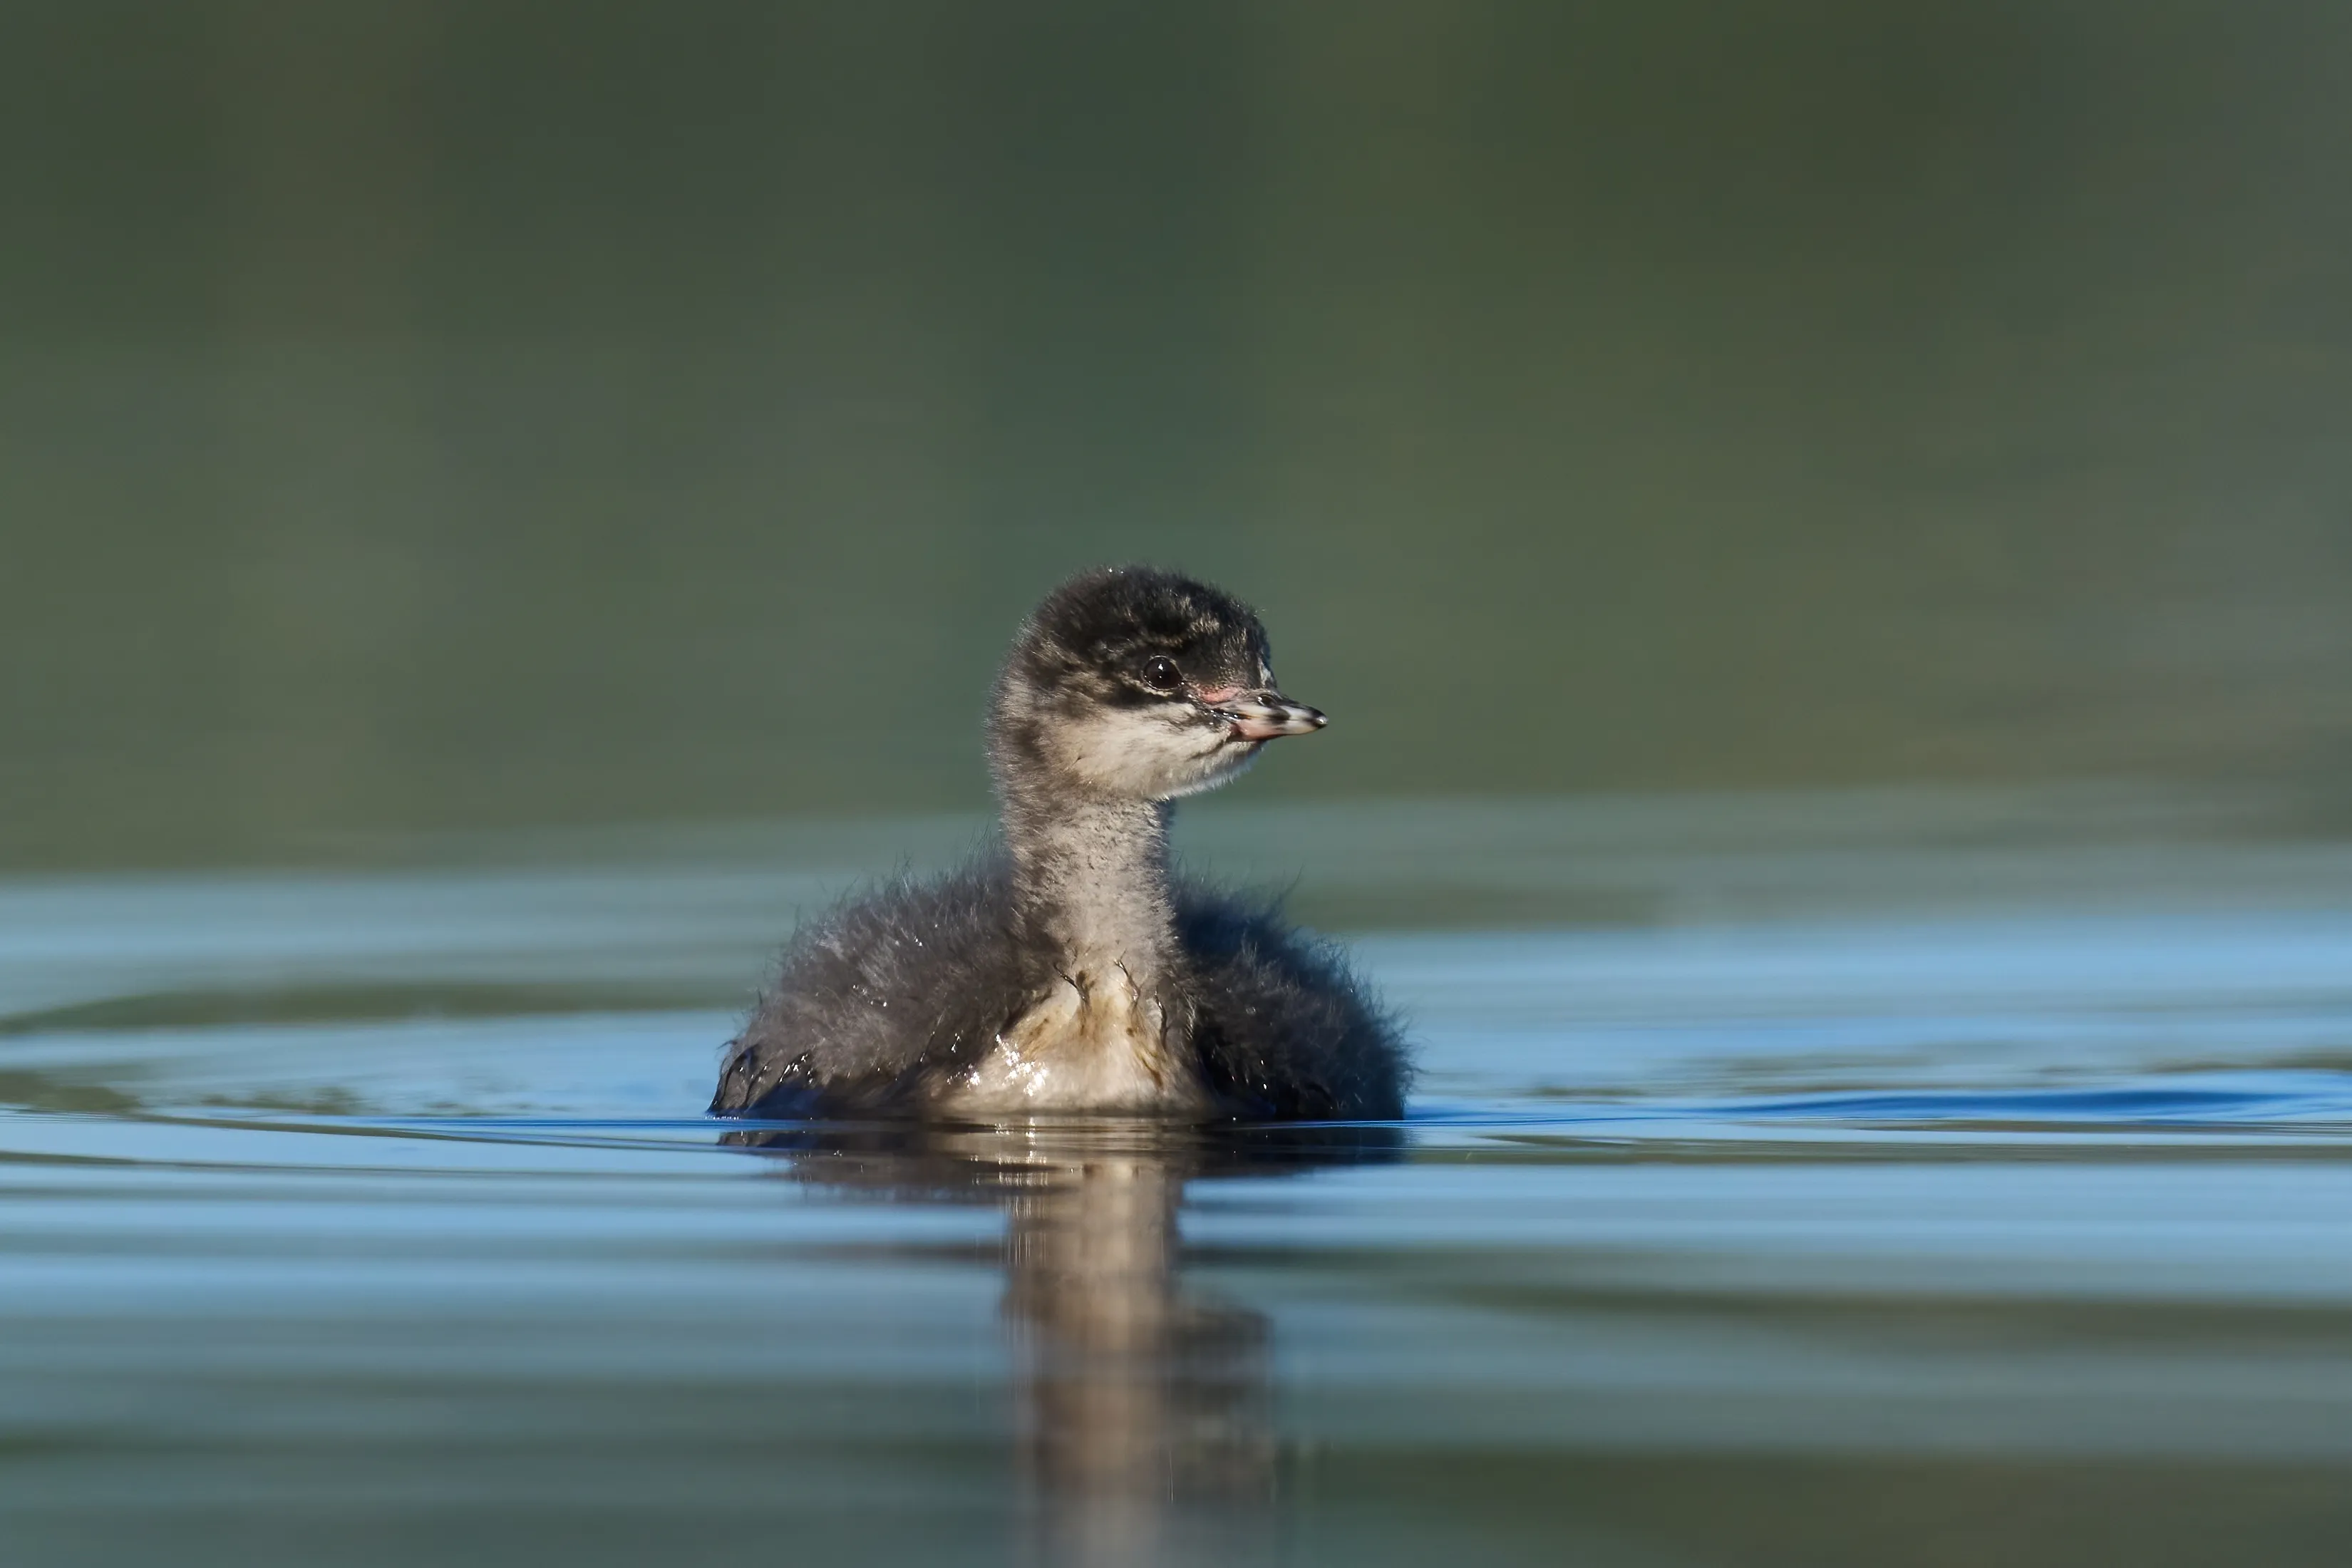 Black-necked Grebe chick swimming in water.